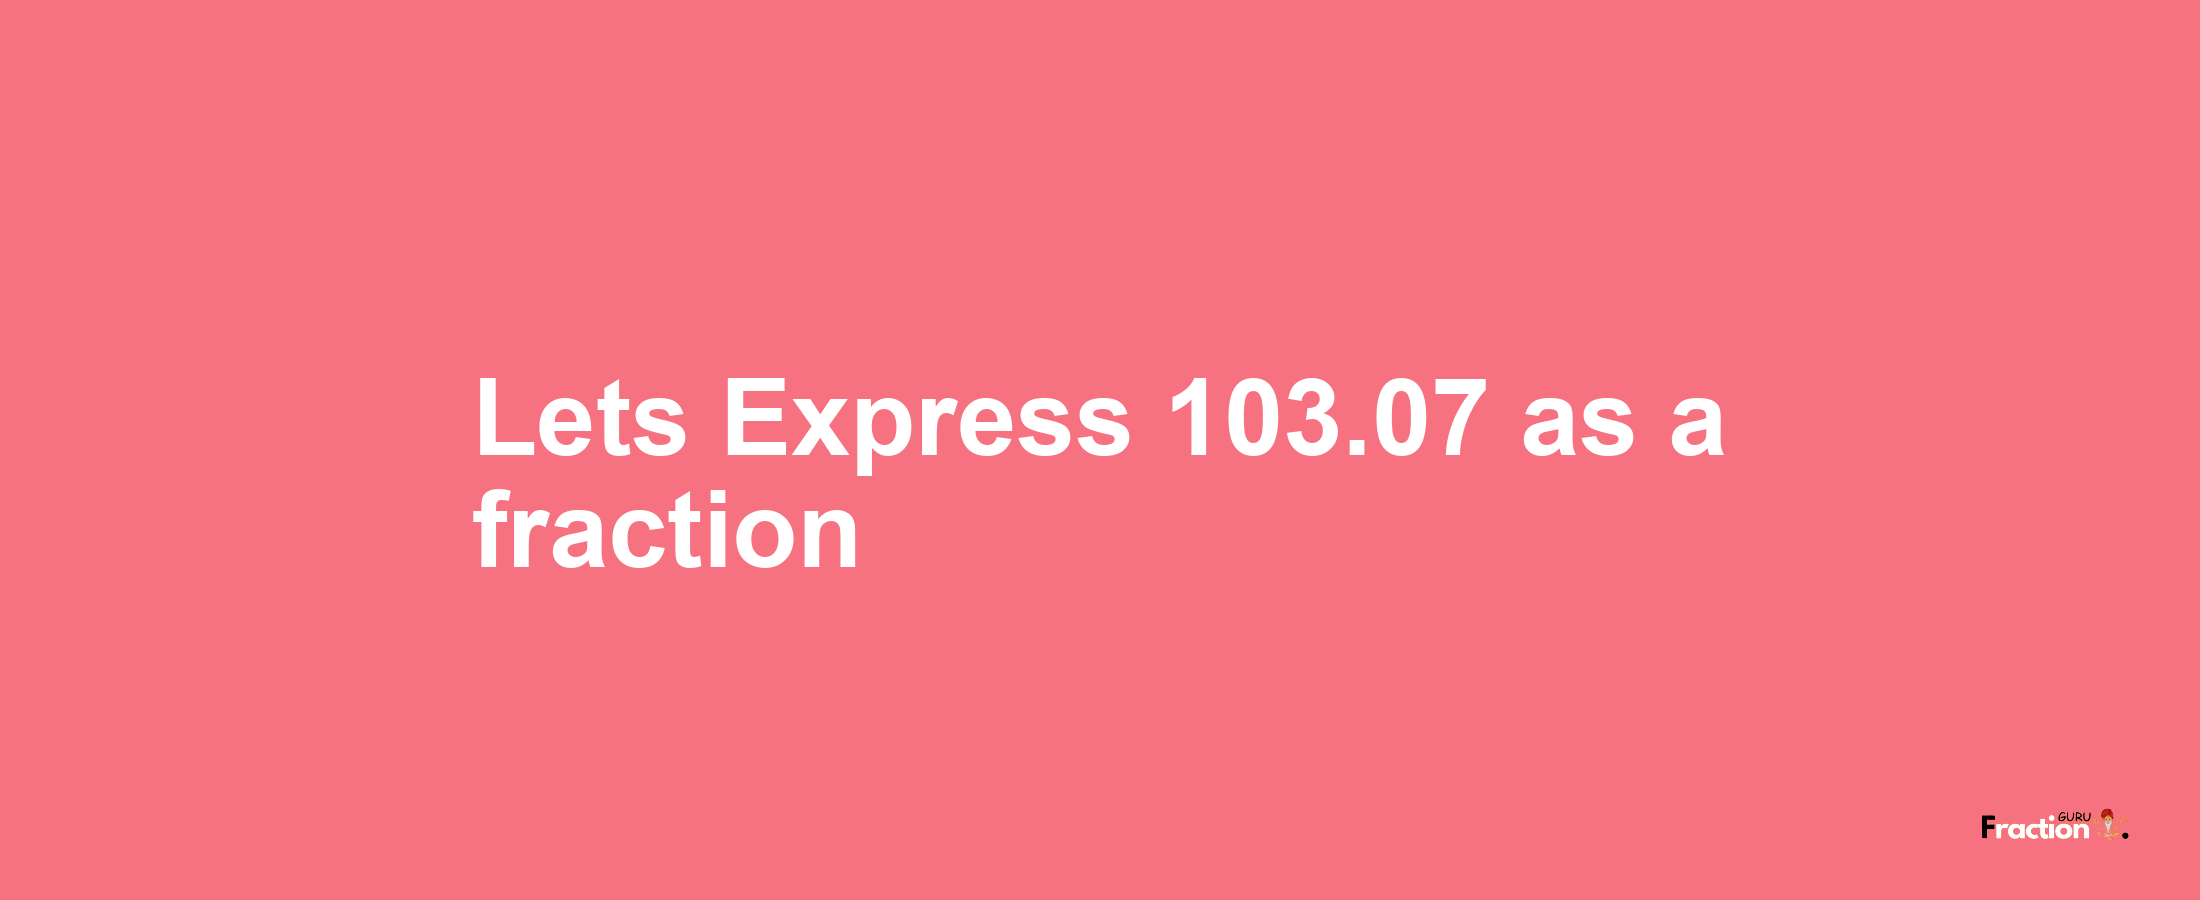 Lets Express 103.07 as afraction